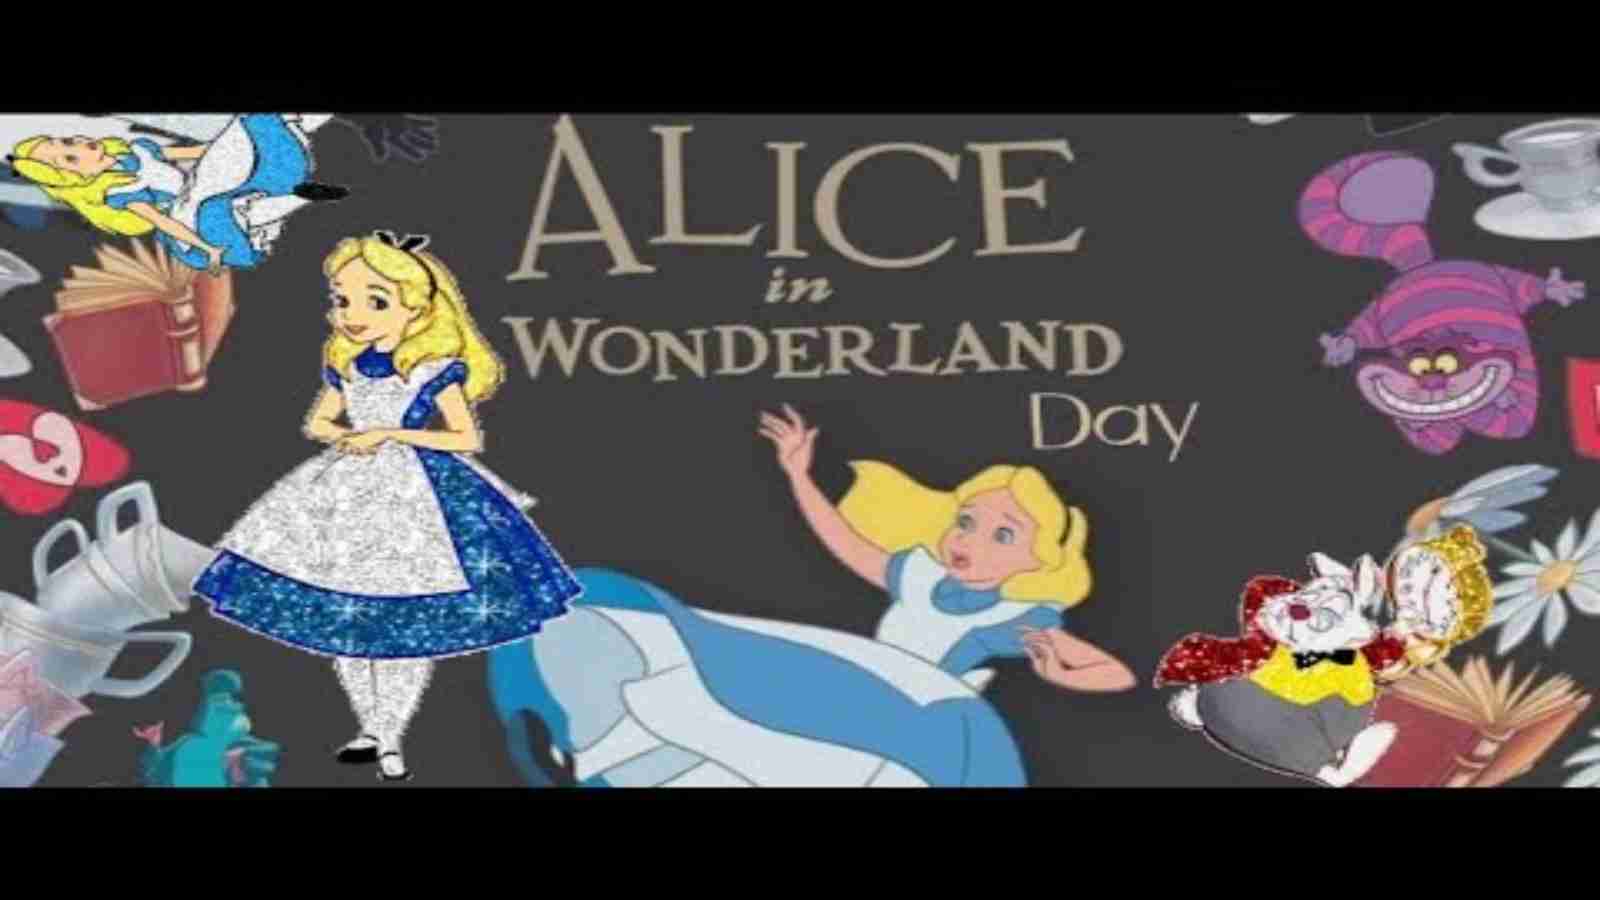 Alice in Wonderland Day 2022: Date, History and Celebrations